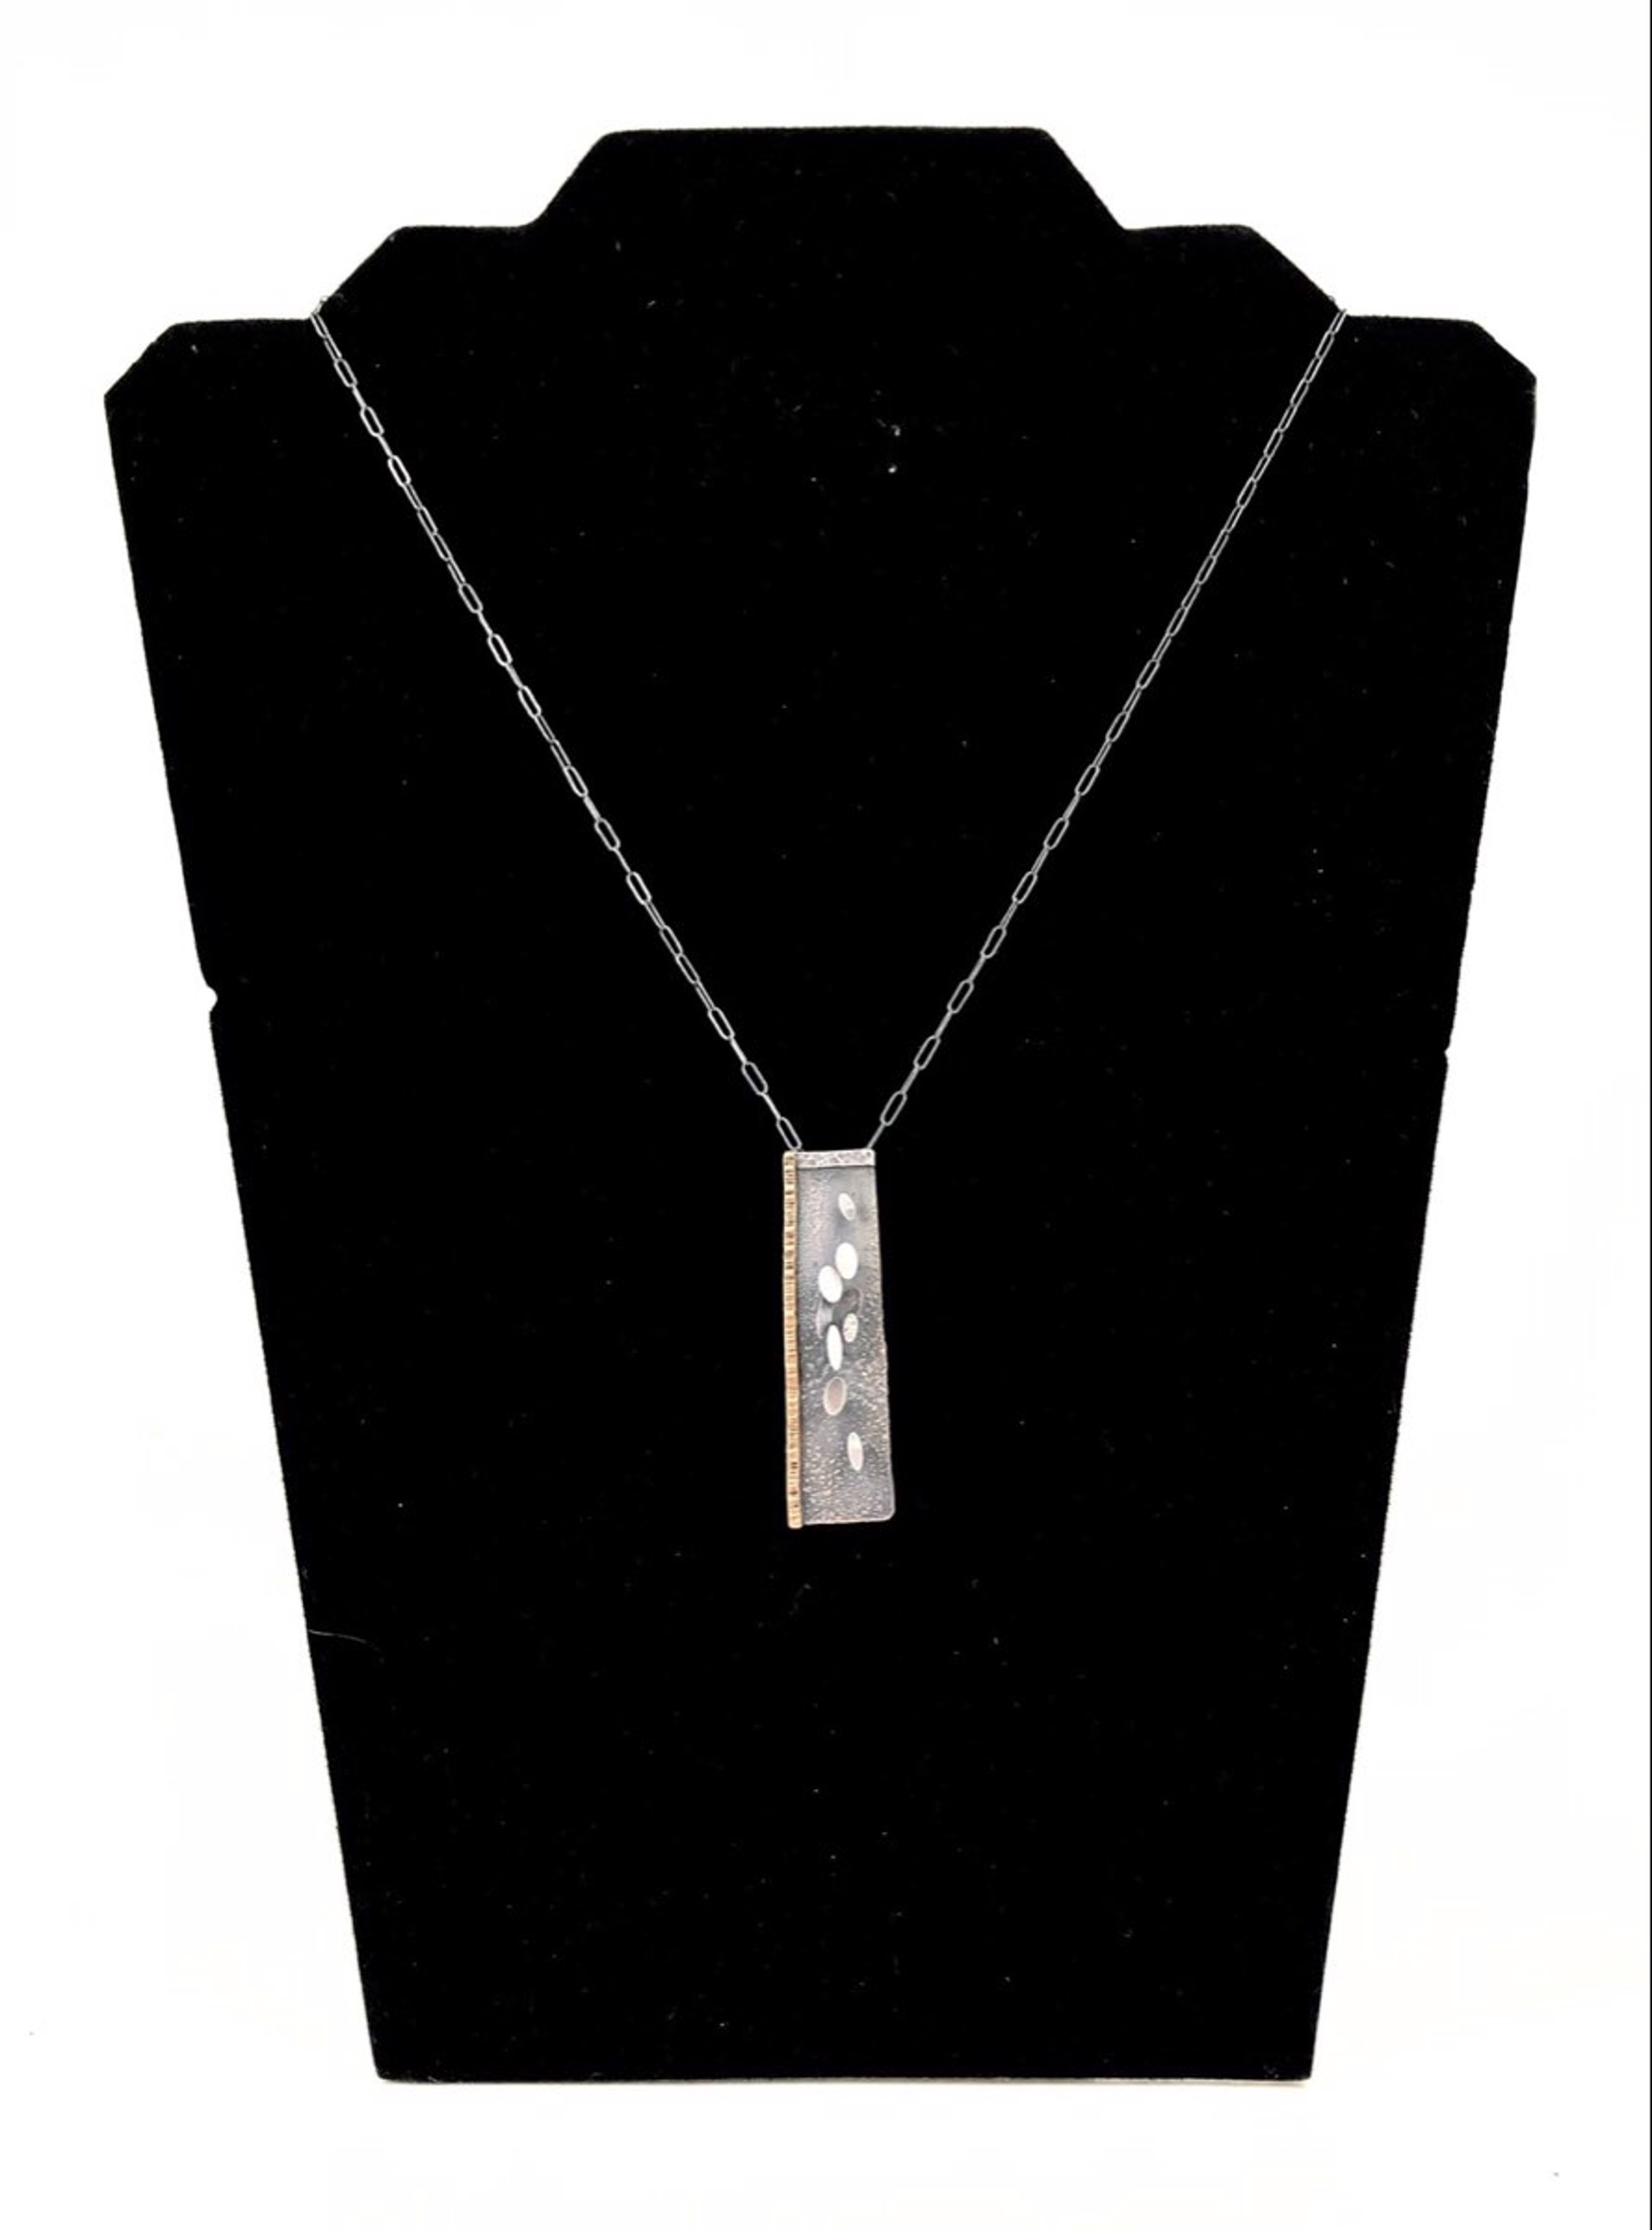 Flow Pendant with Silver Chain by Theresa St. Romain